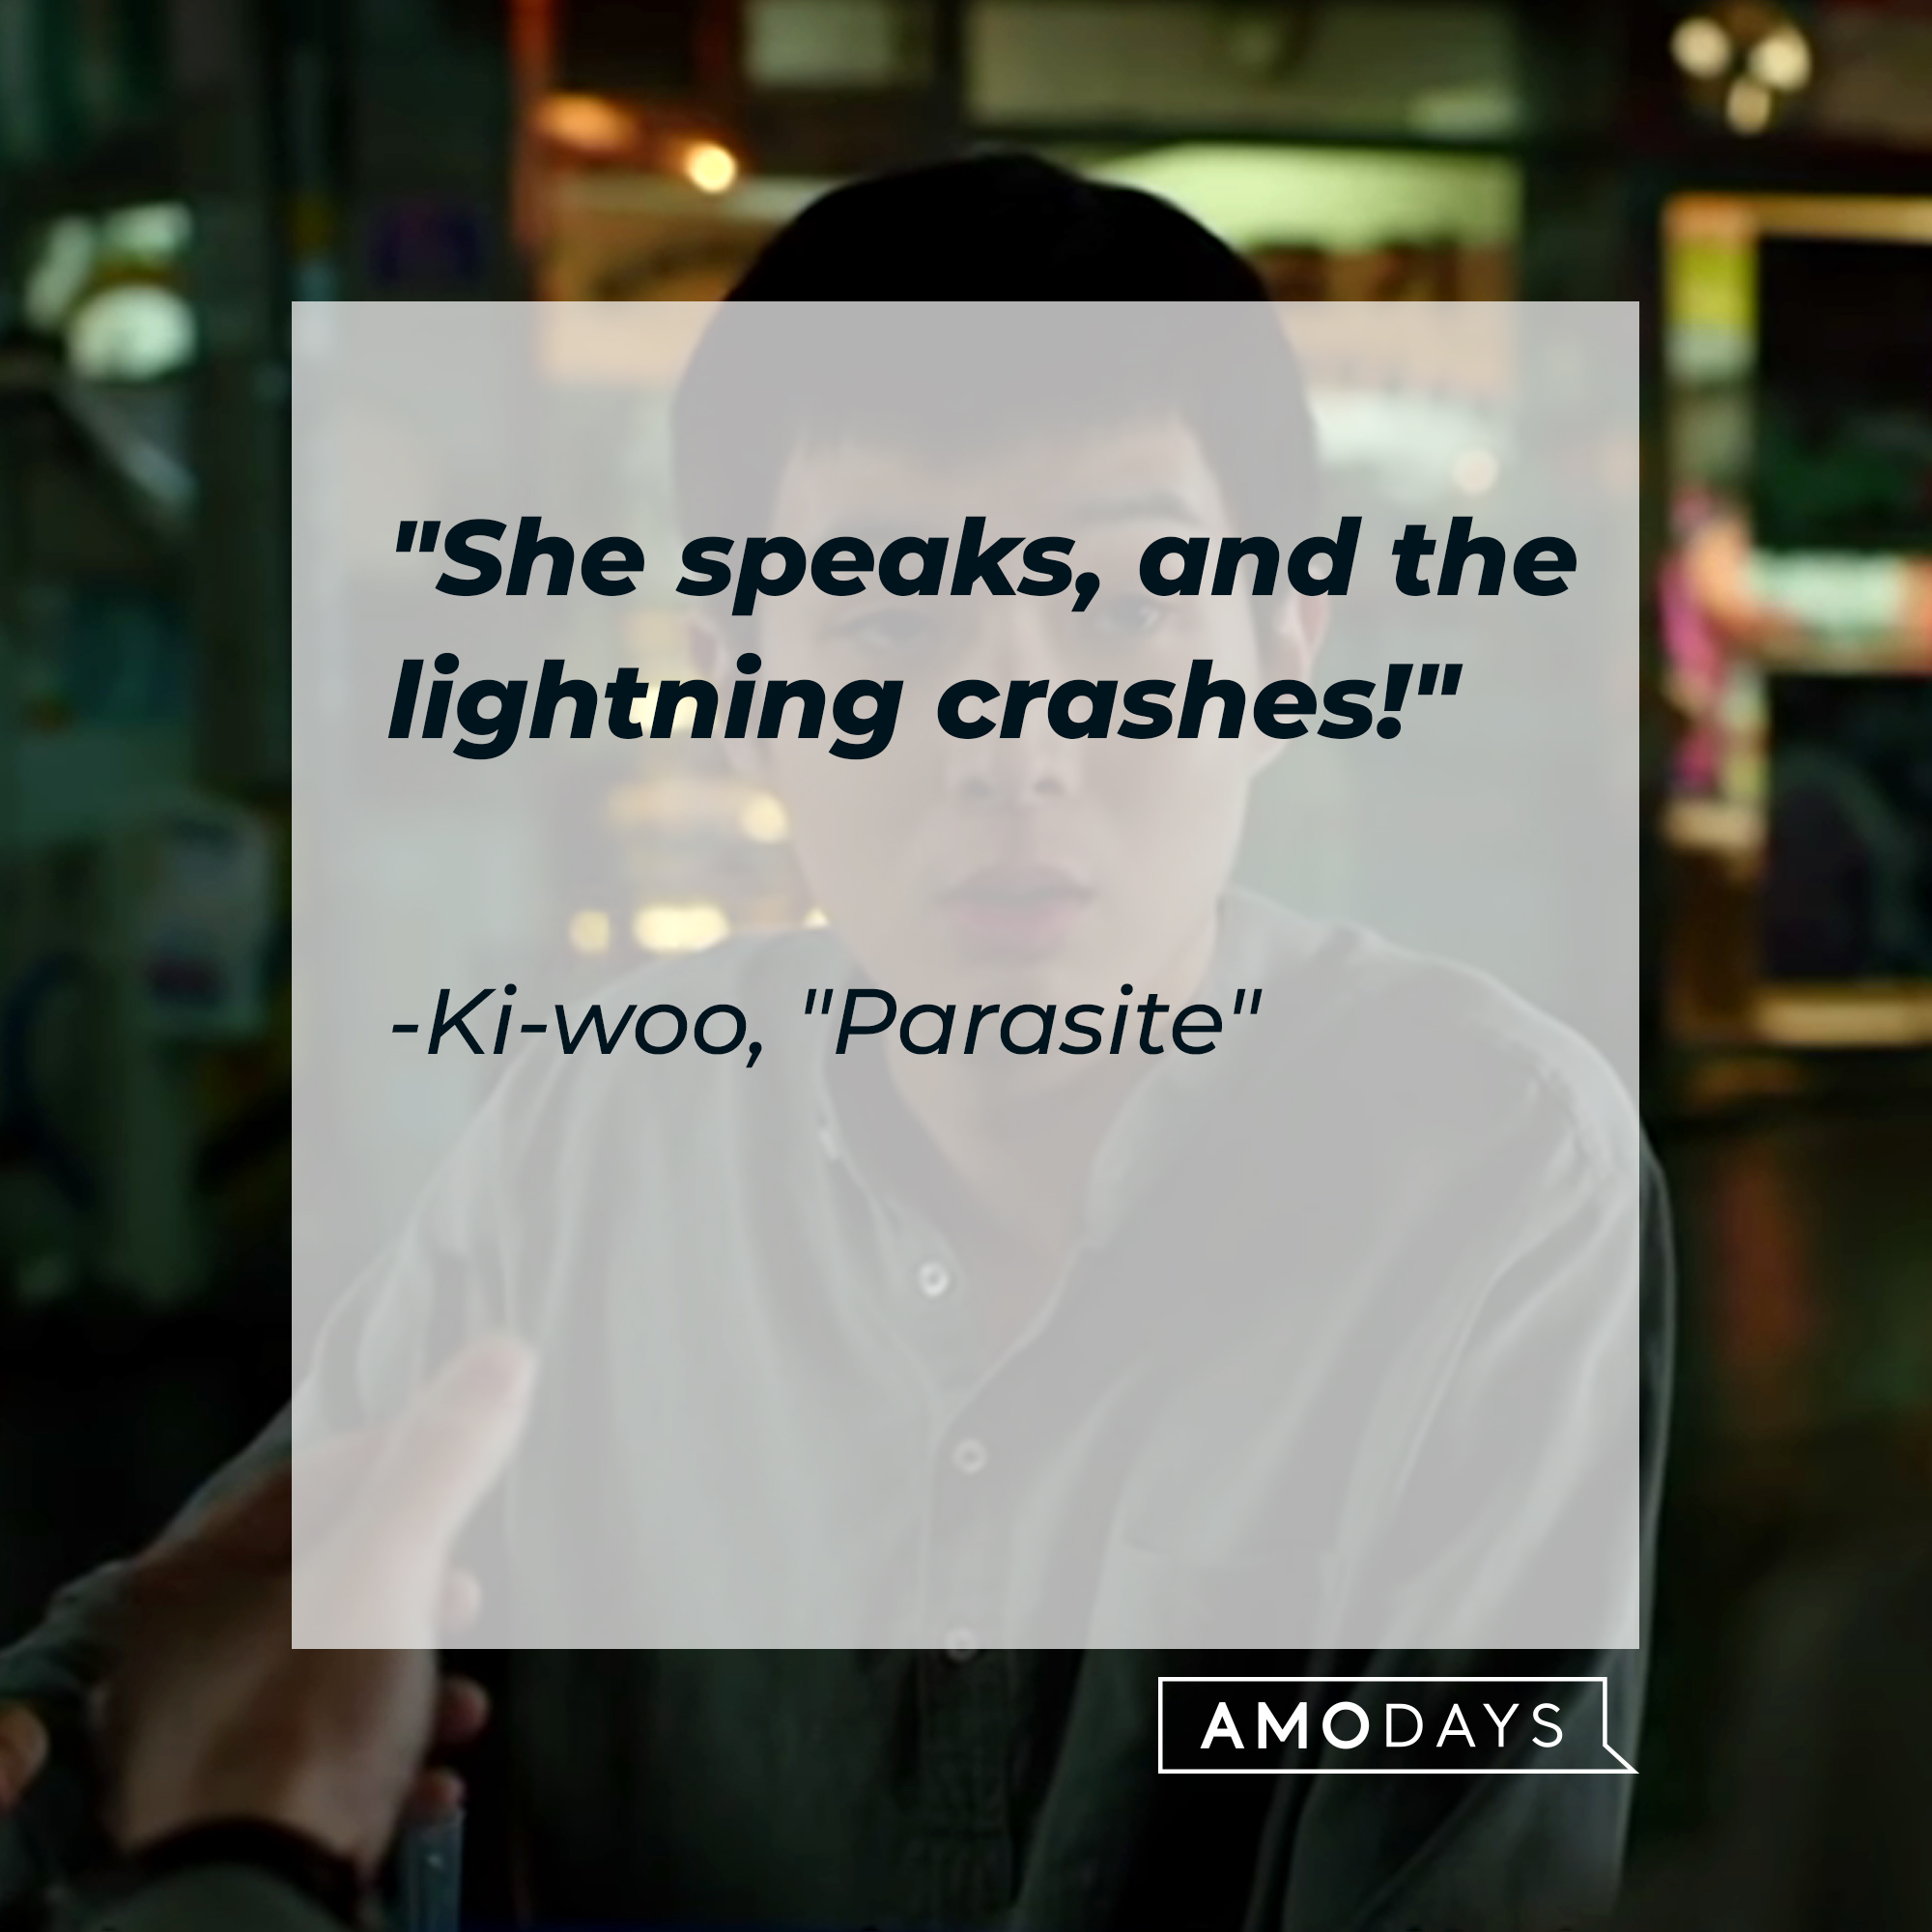 Ki-woo with his quote: "She speaks, and the lightning crashes!" | Source: Facebook.com/ParasiteMovie